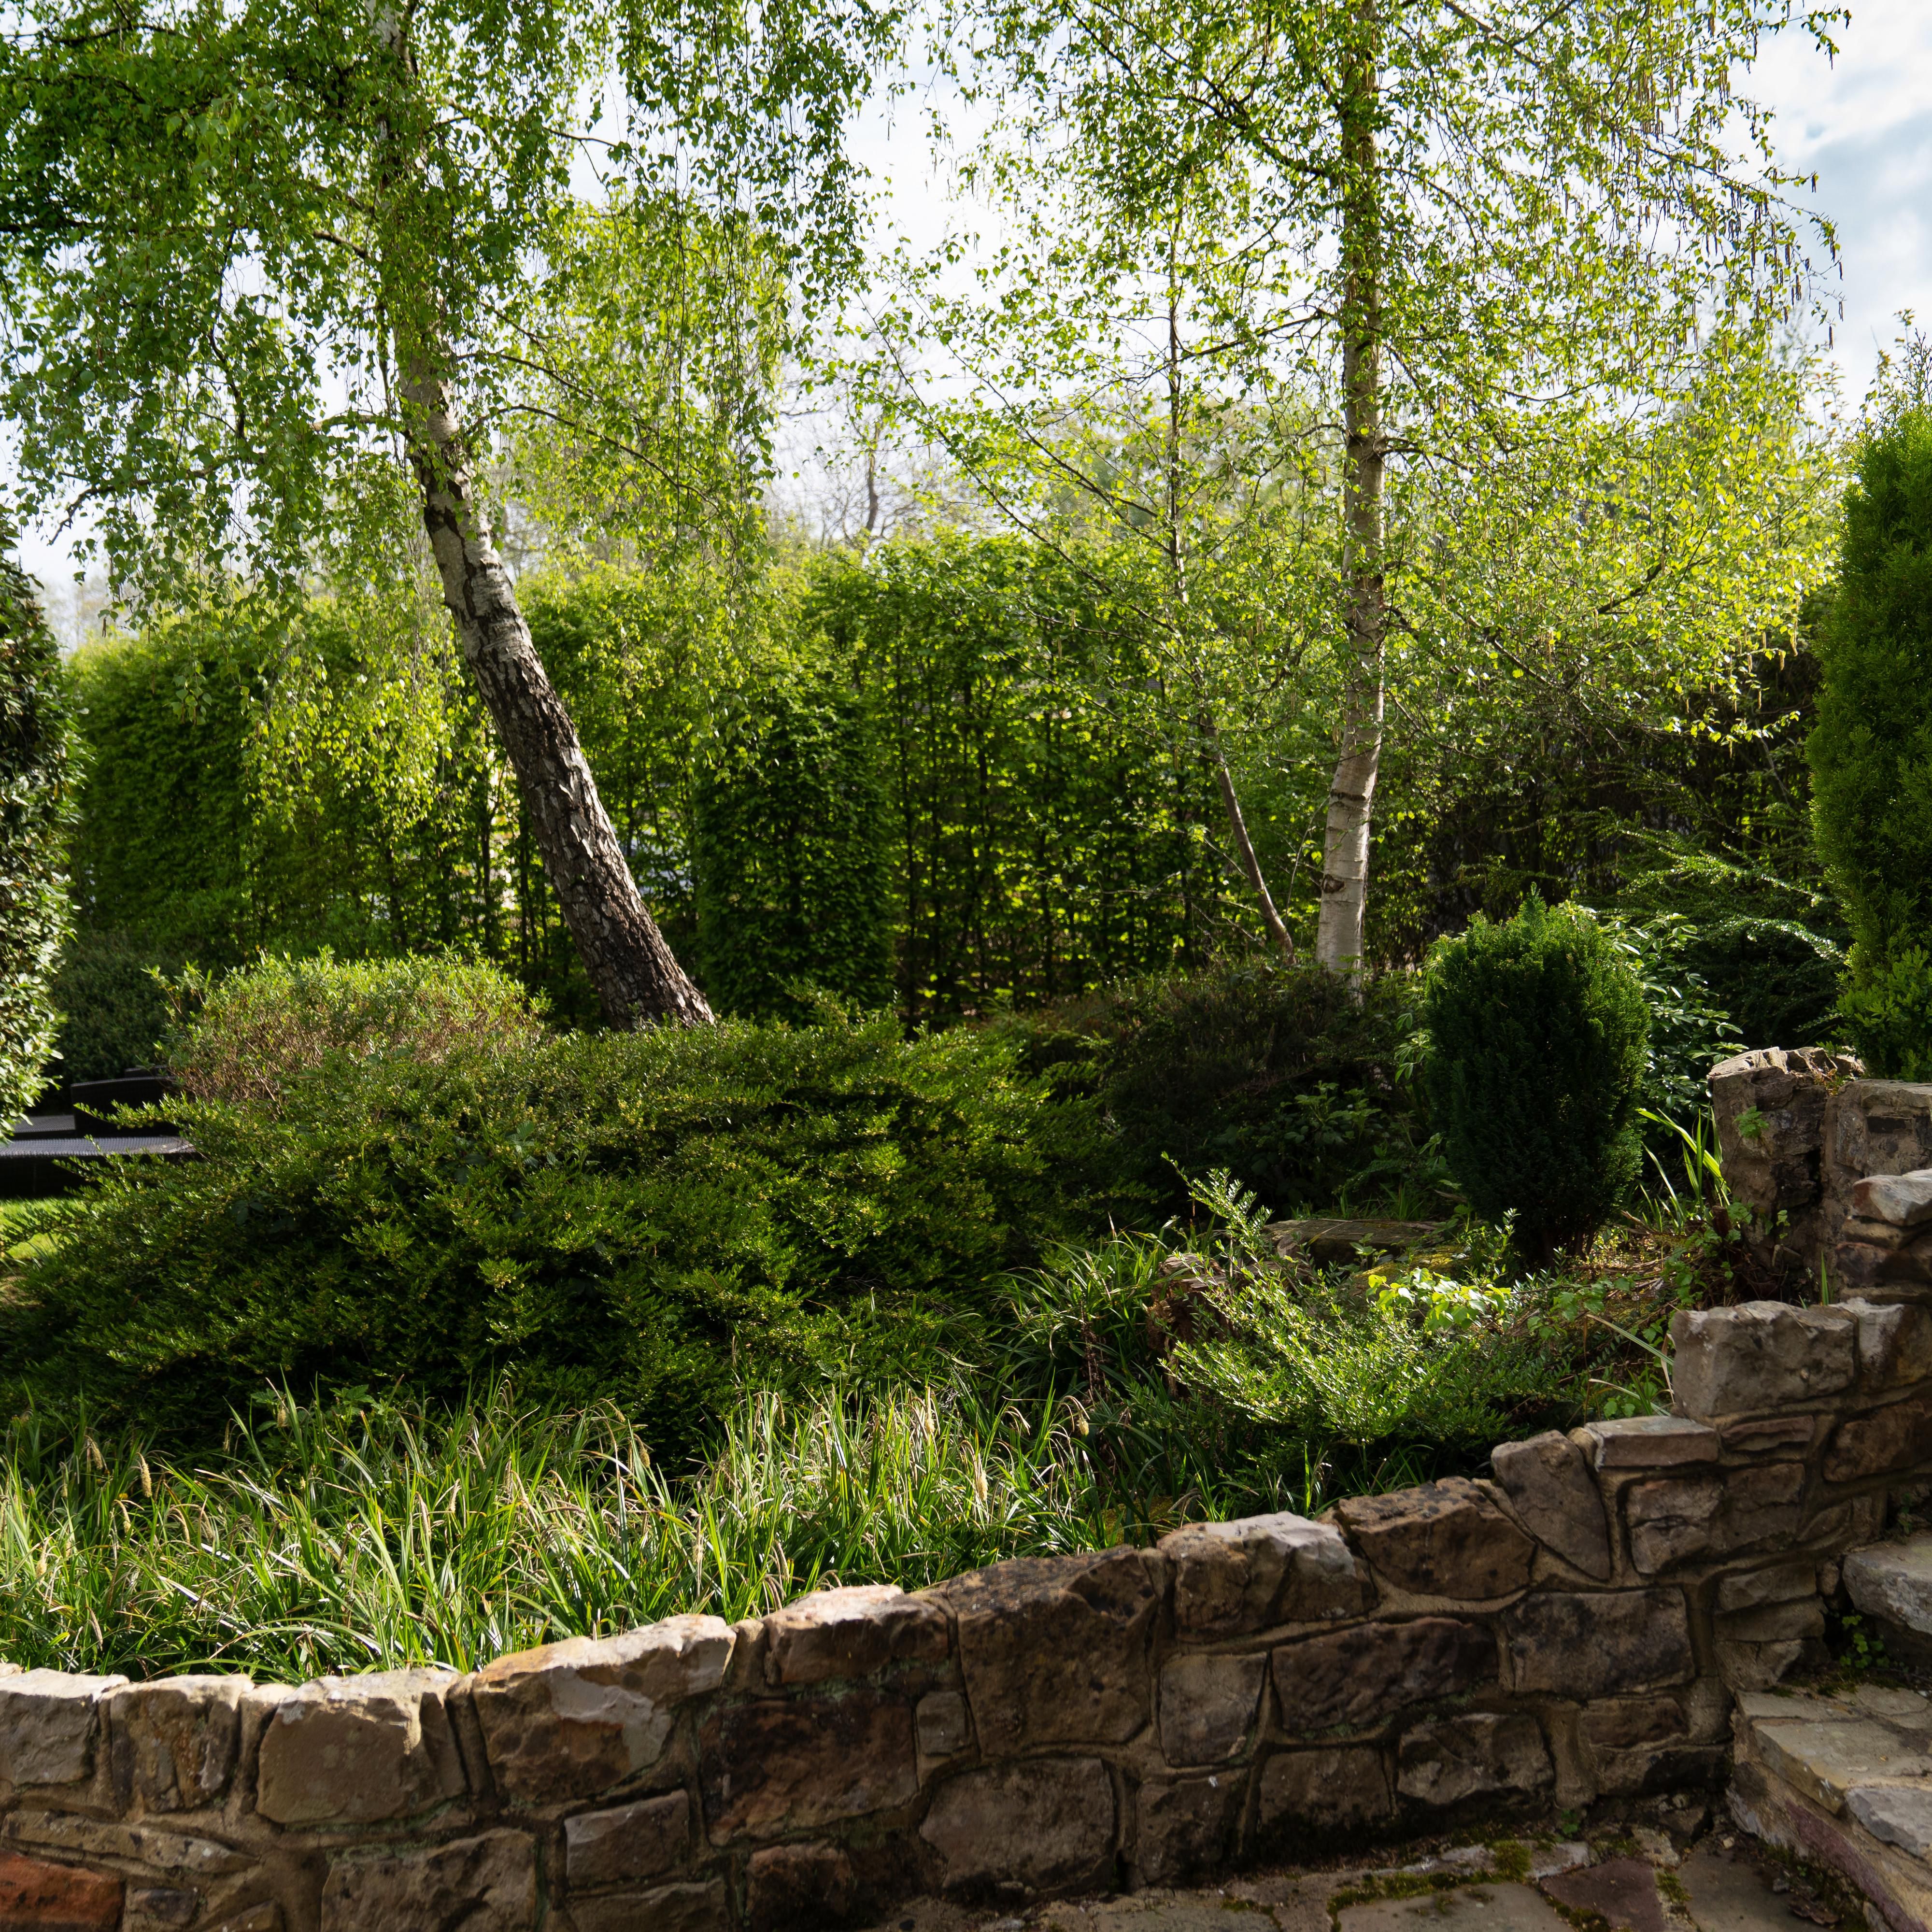 Our stunning courtyard garden for guest to enjoy.